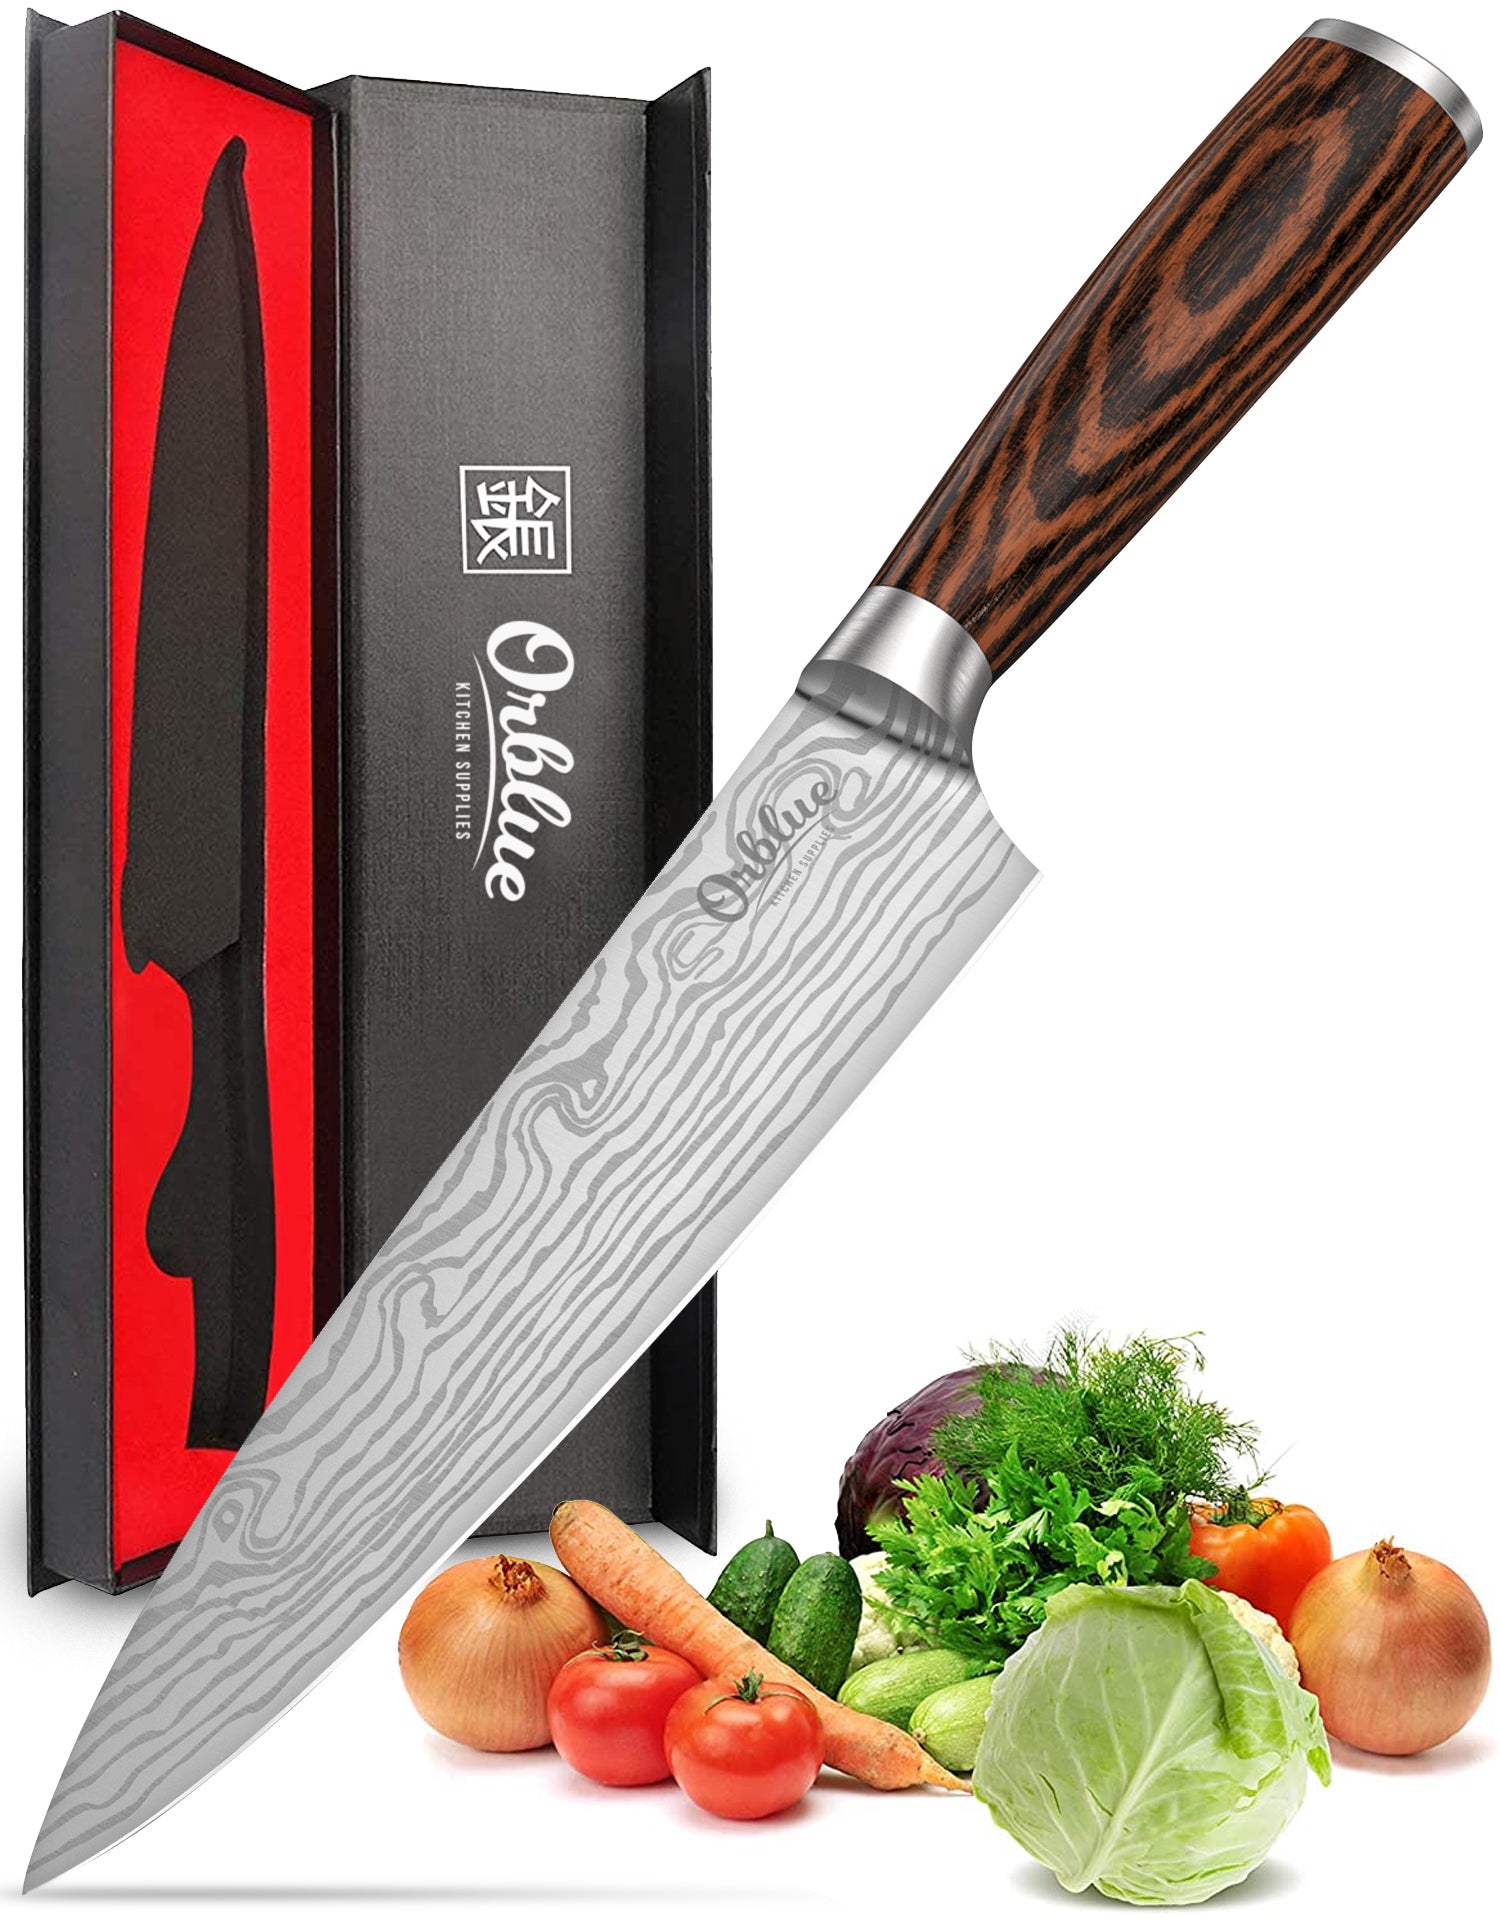 Professional Chef Knife Set, 8 Pieces High Carbon Stainless Steel Masterchef Knives with Knife Sharpening Rod Roll Bag and More Kitchen Gadgets